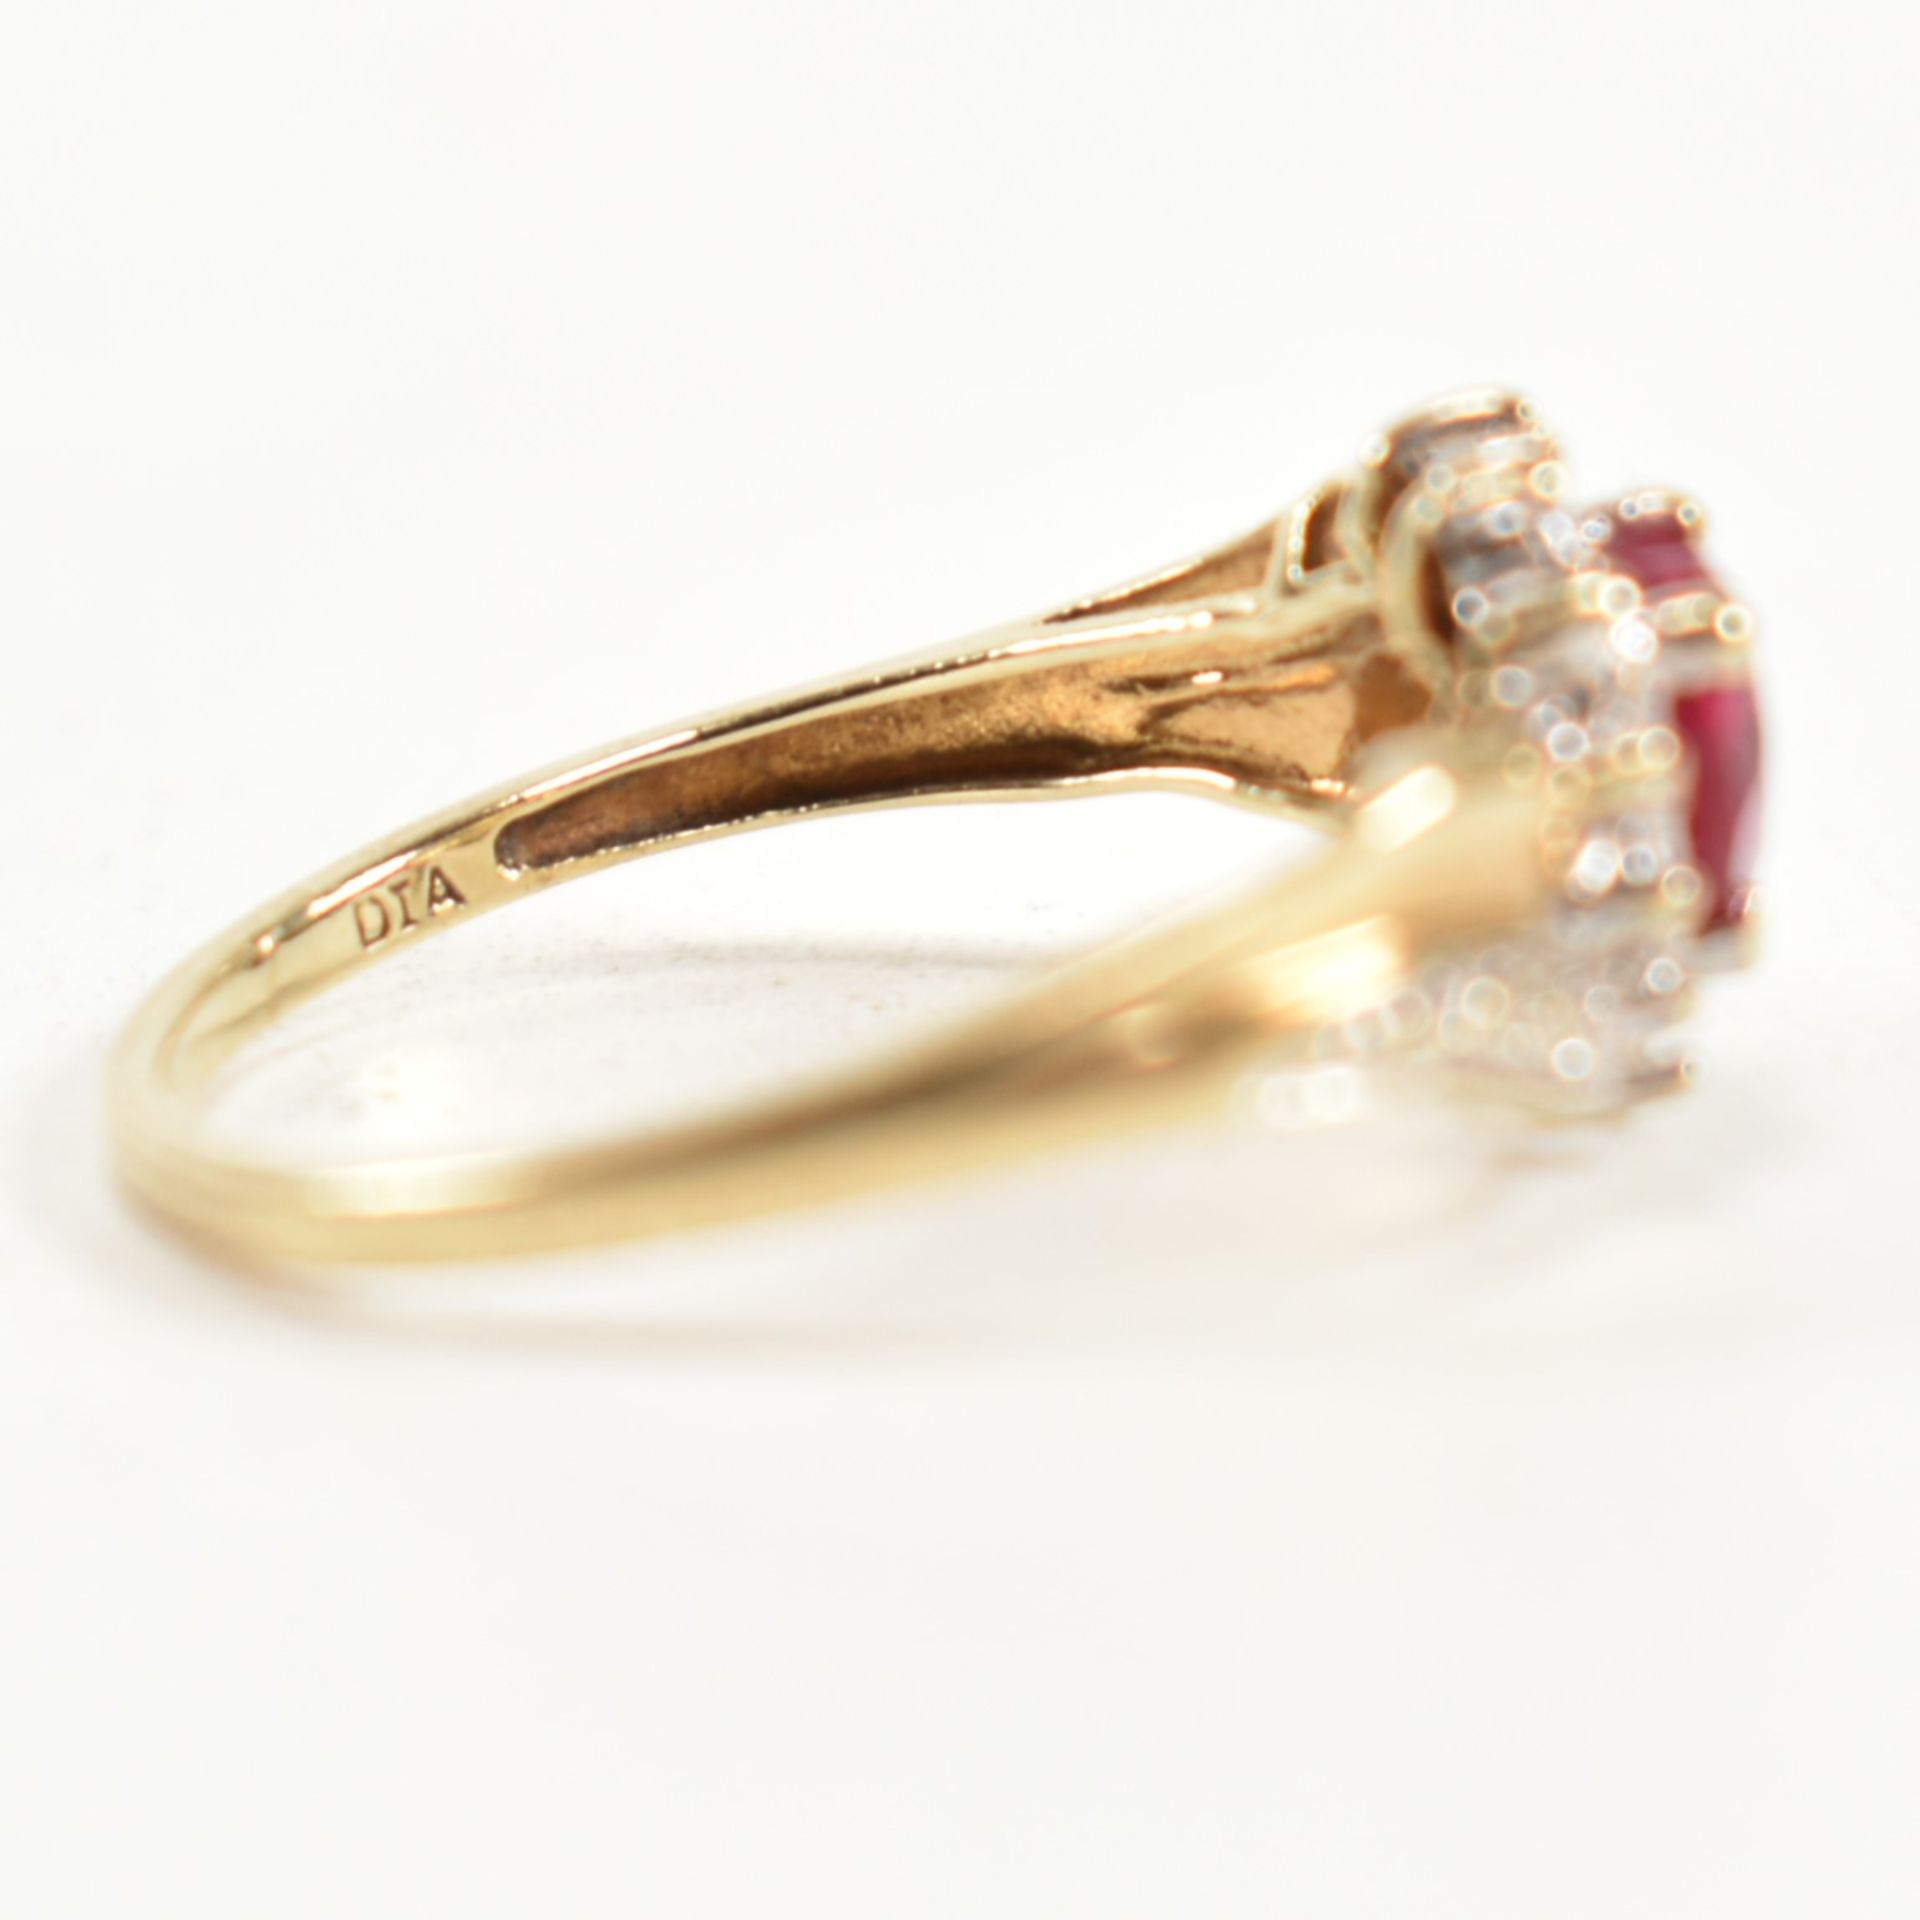 HALLMARKED 9CT GOLD DIAMOND & RUBY CLUSTER RING - Image 5 of 10